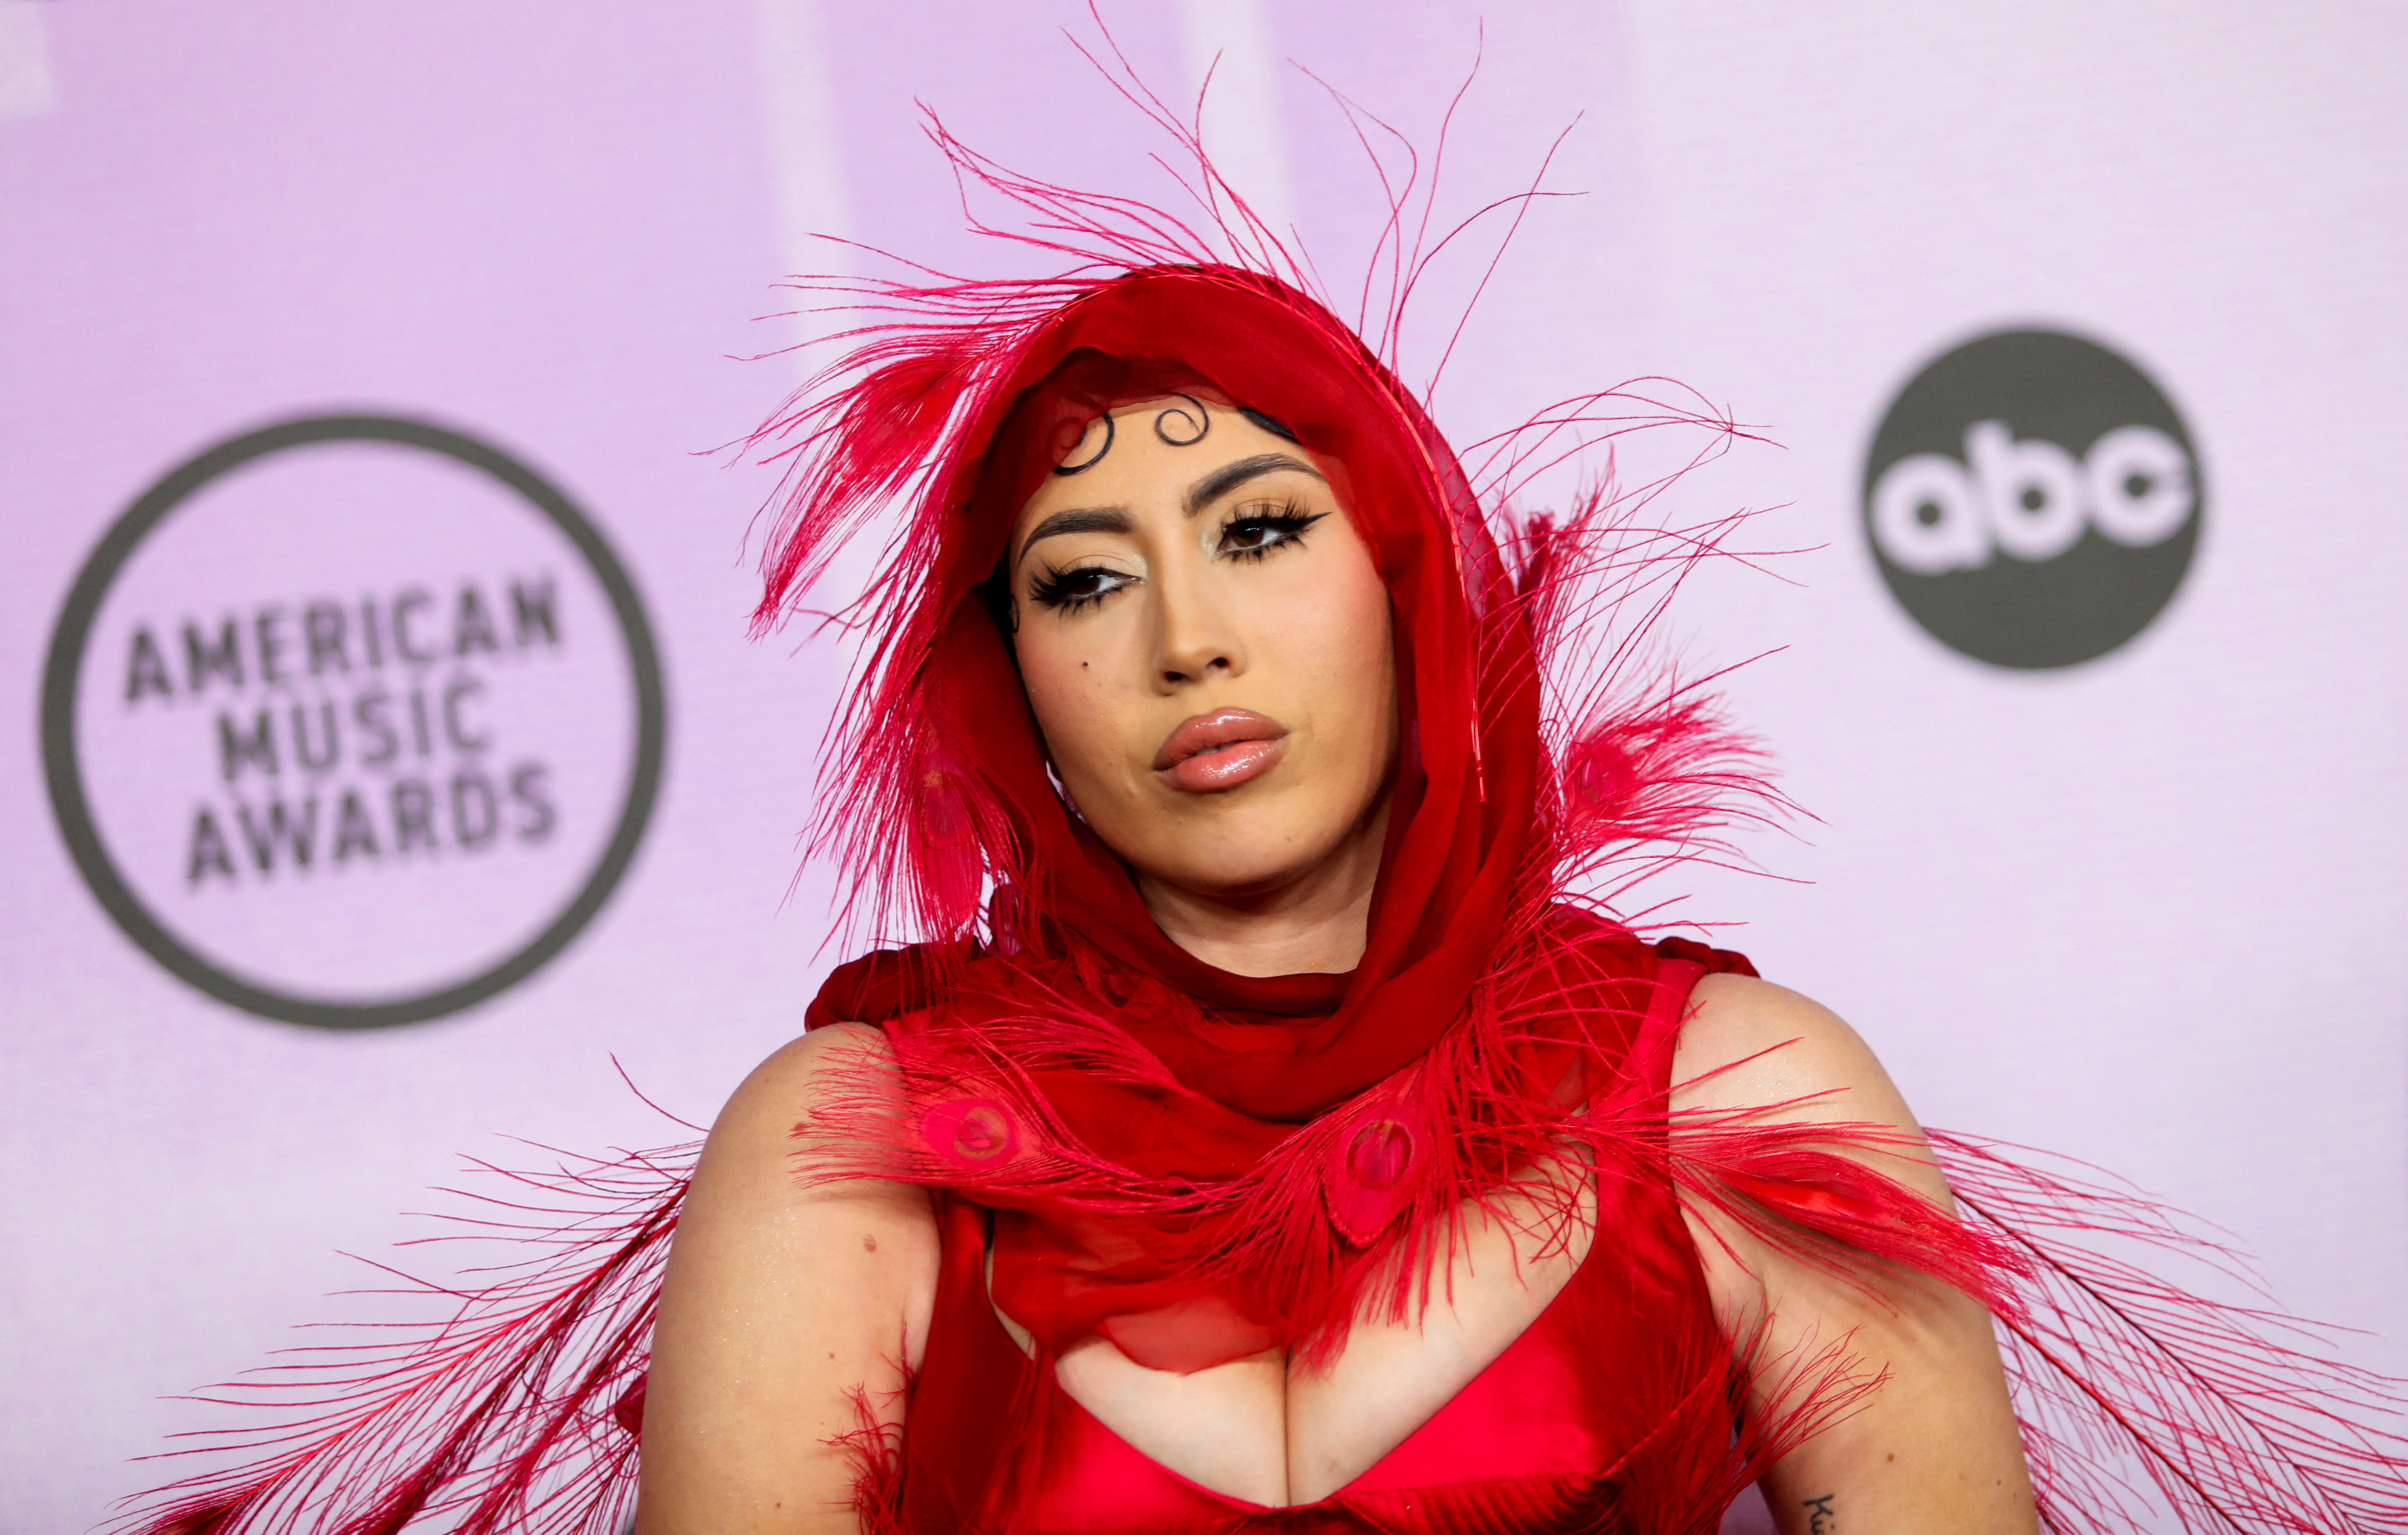 Kali Uchis arrives at the 2022 American Music Awards at the Microsoft Theater, in Los Angeles, California, US, November 20, 2022. REUTERS/Aude Guerrucci